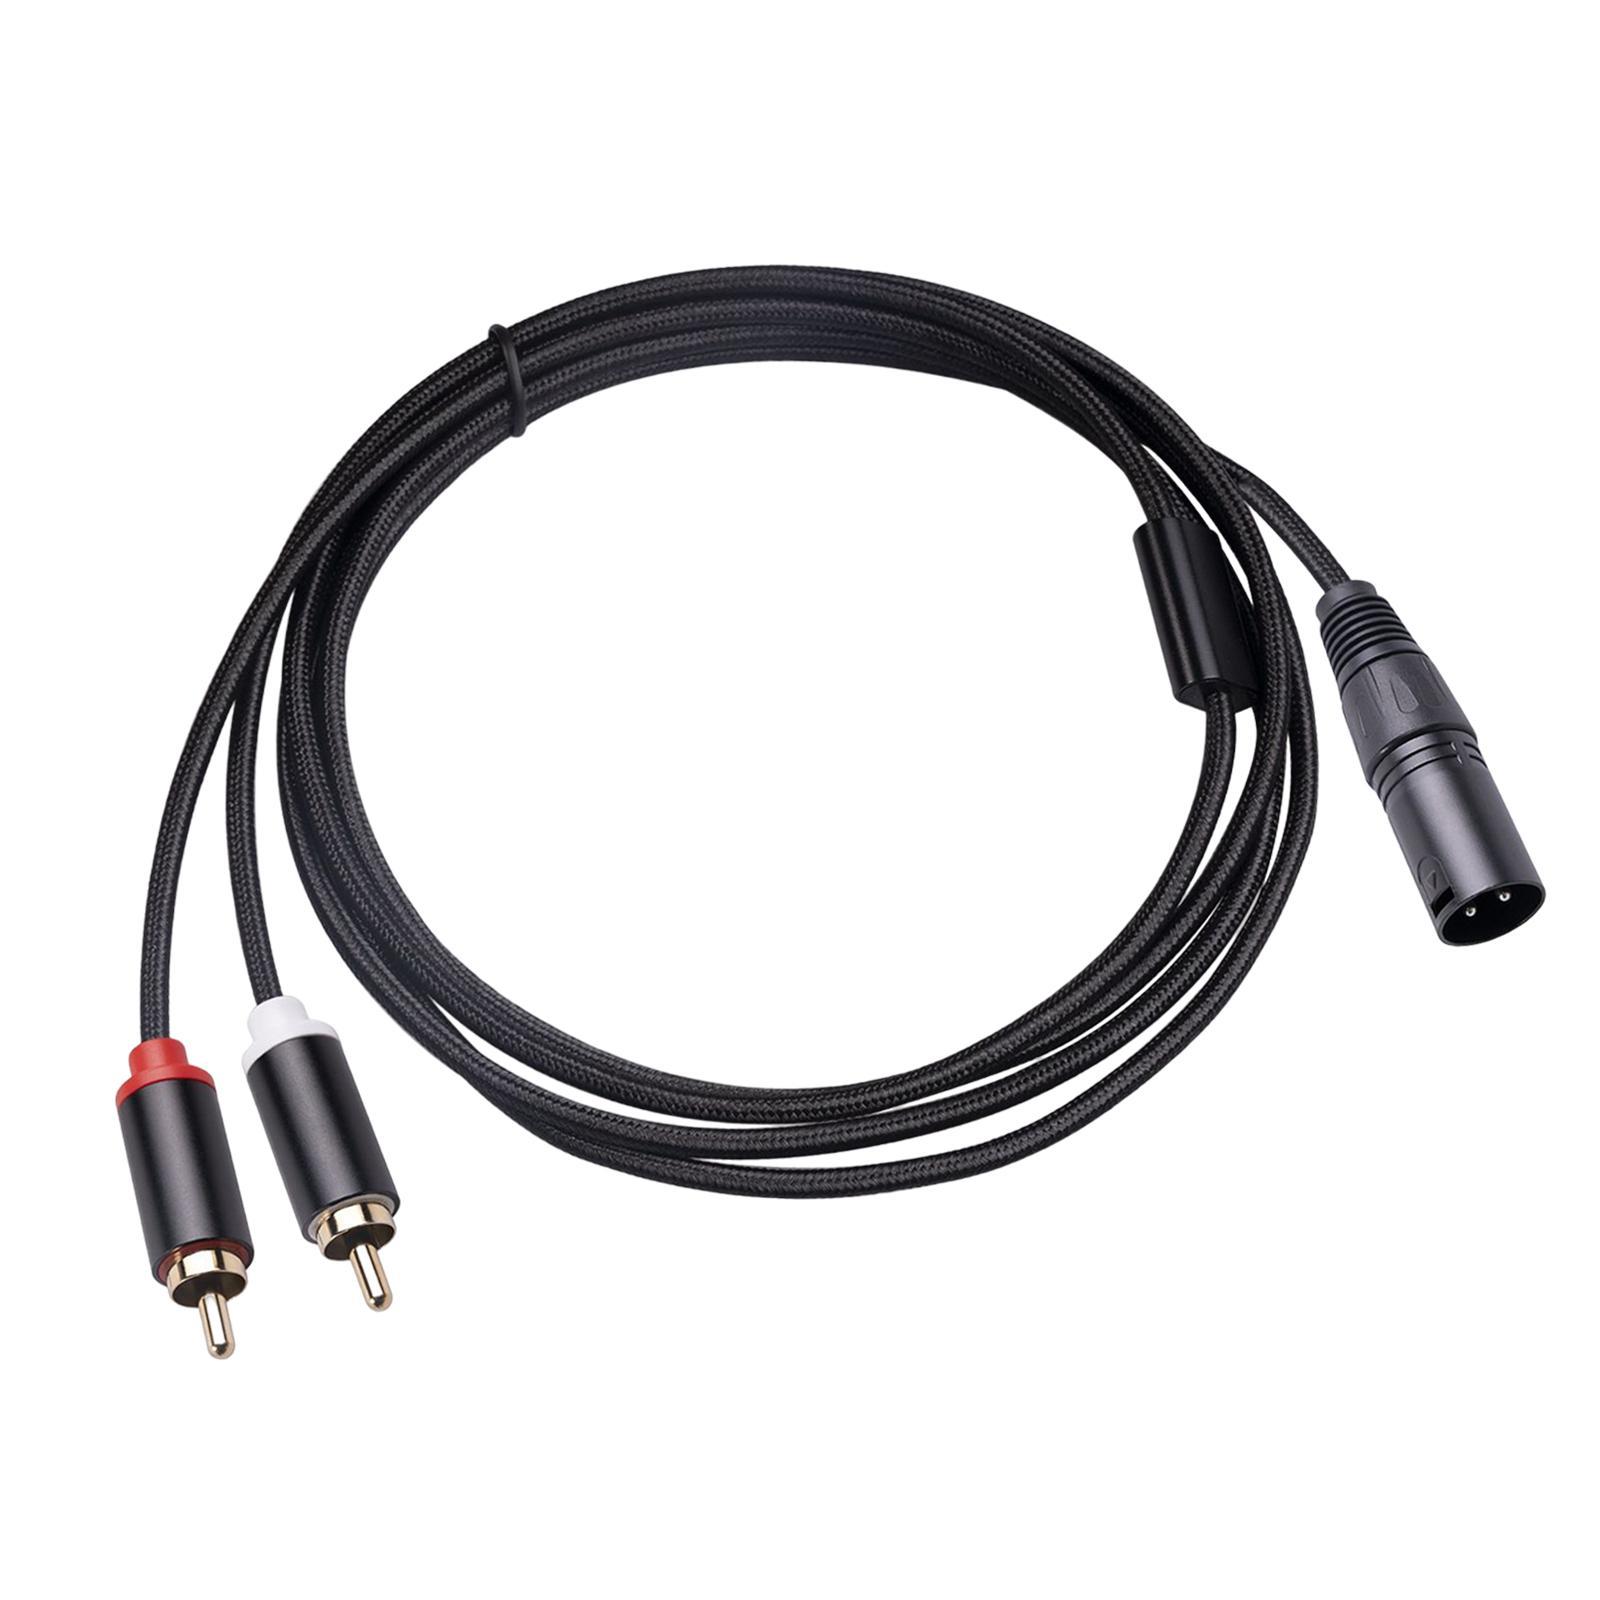 XLR to Dual Cable HiFi Stereo for Phones Mixers Home Theater Components 1m